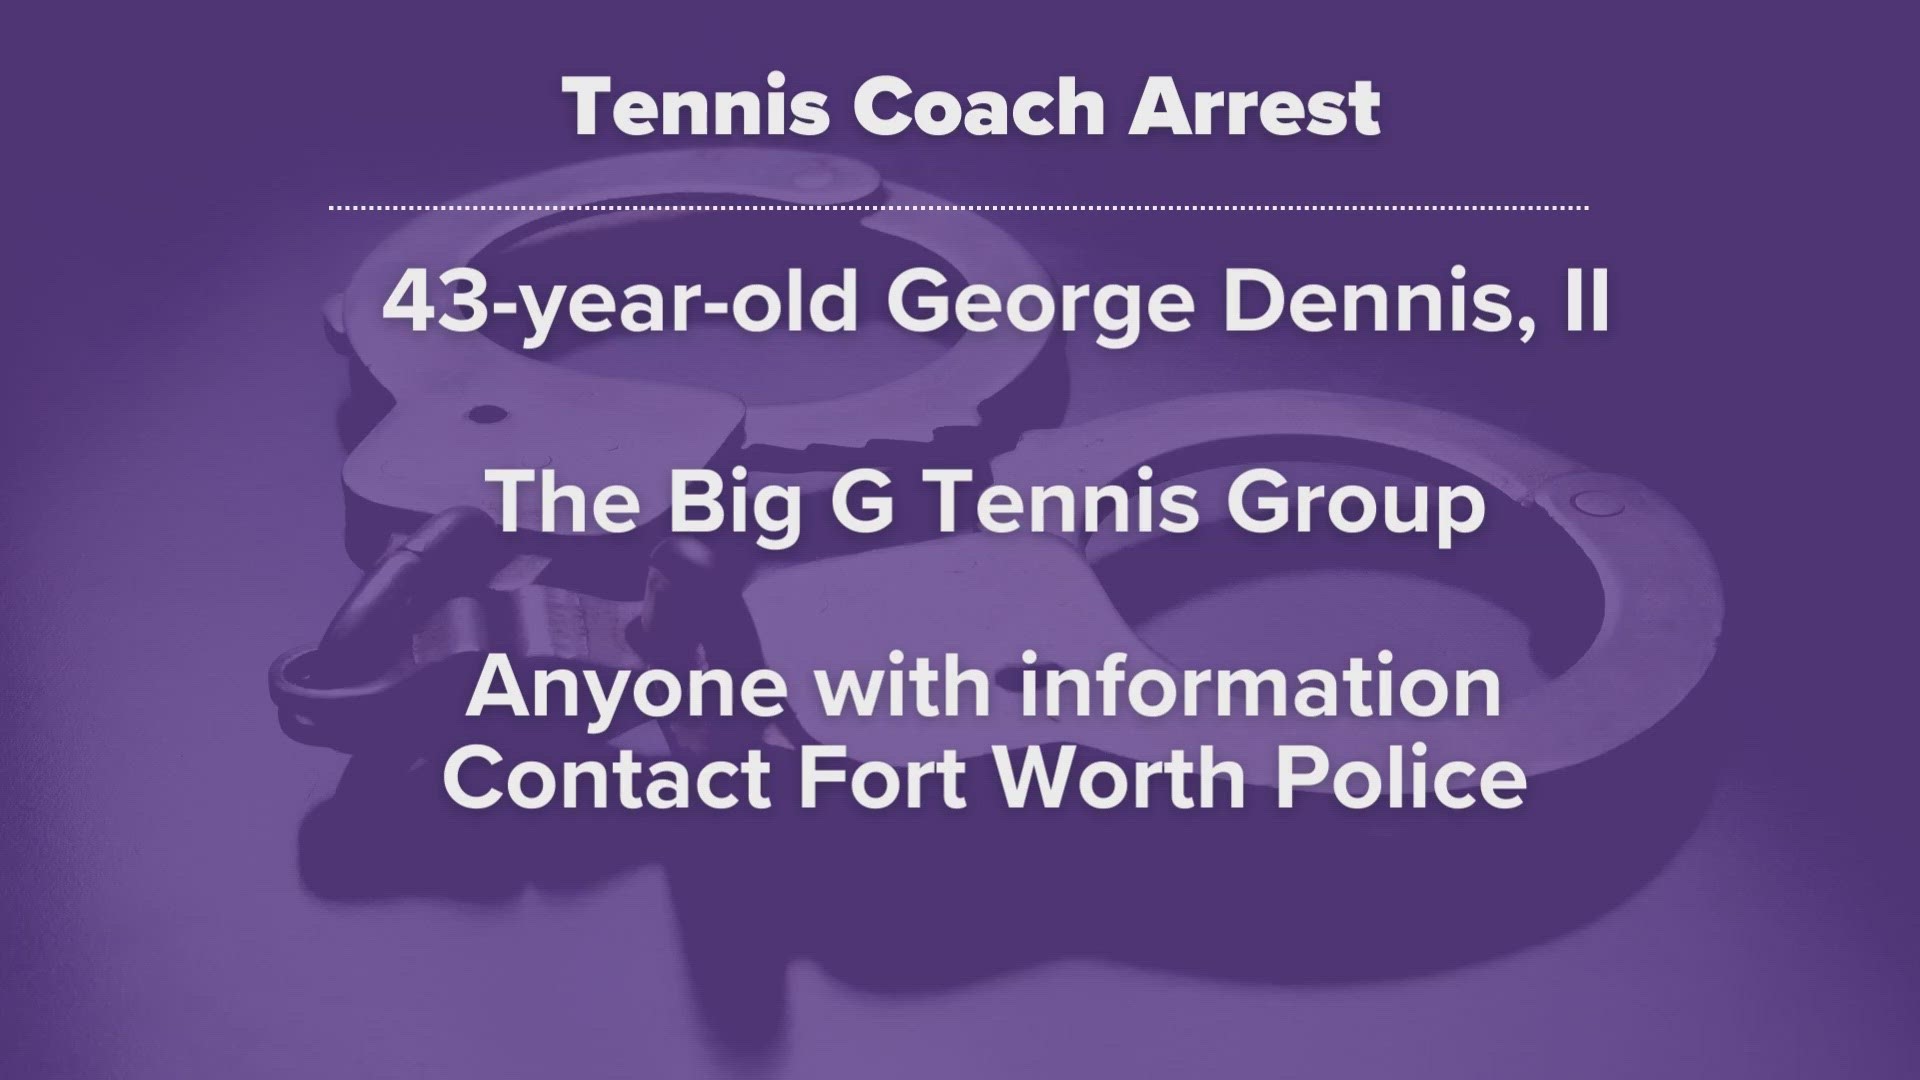 George Dennis II has reportedly worked as a private tennis coach in the north Fort Worth area through his company, The Big G Tennis Group, police said.